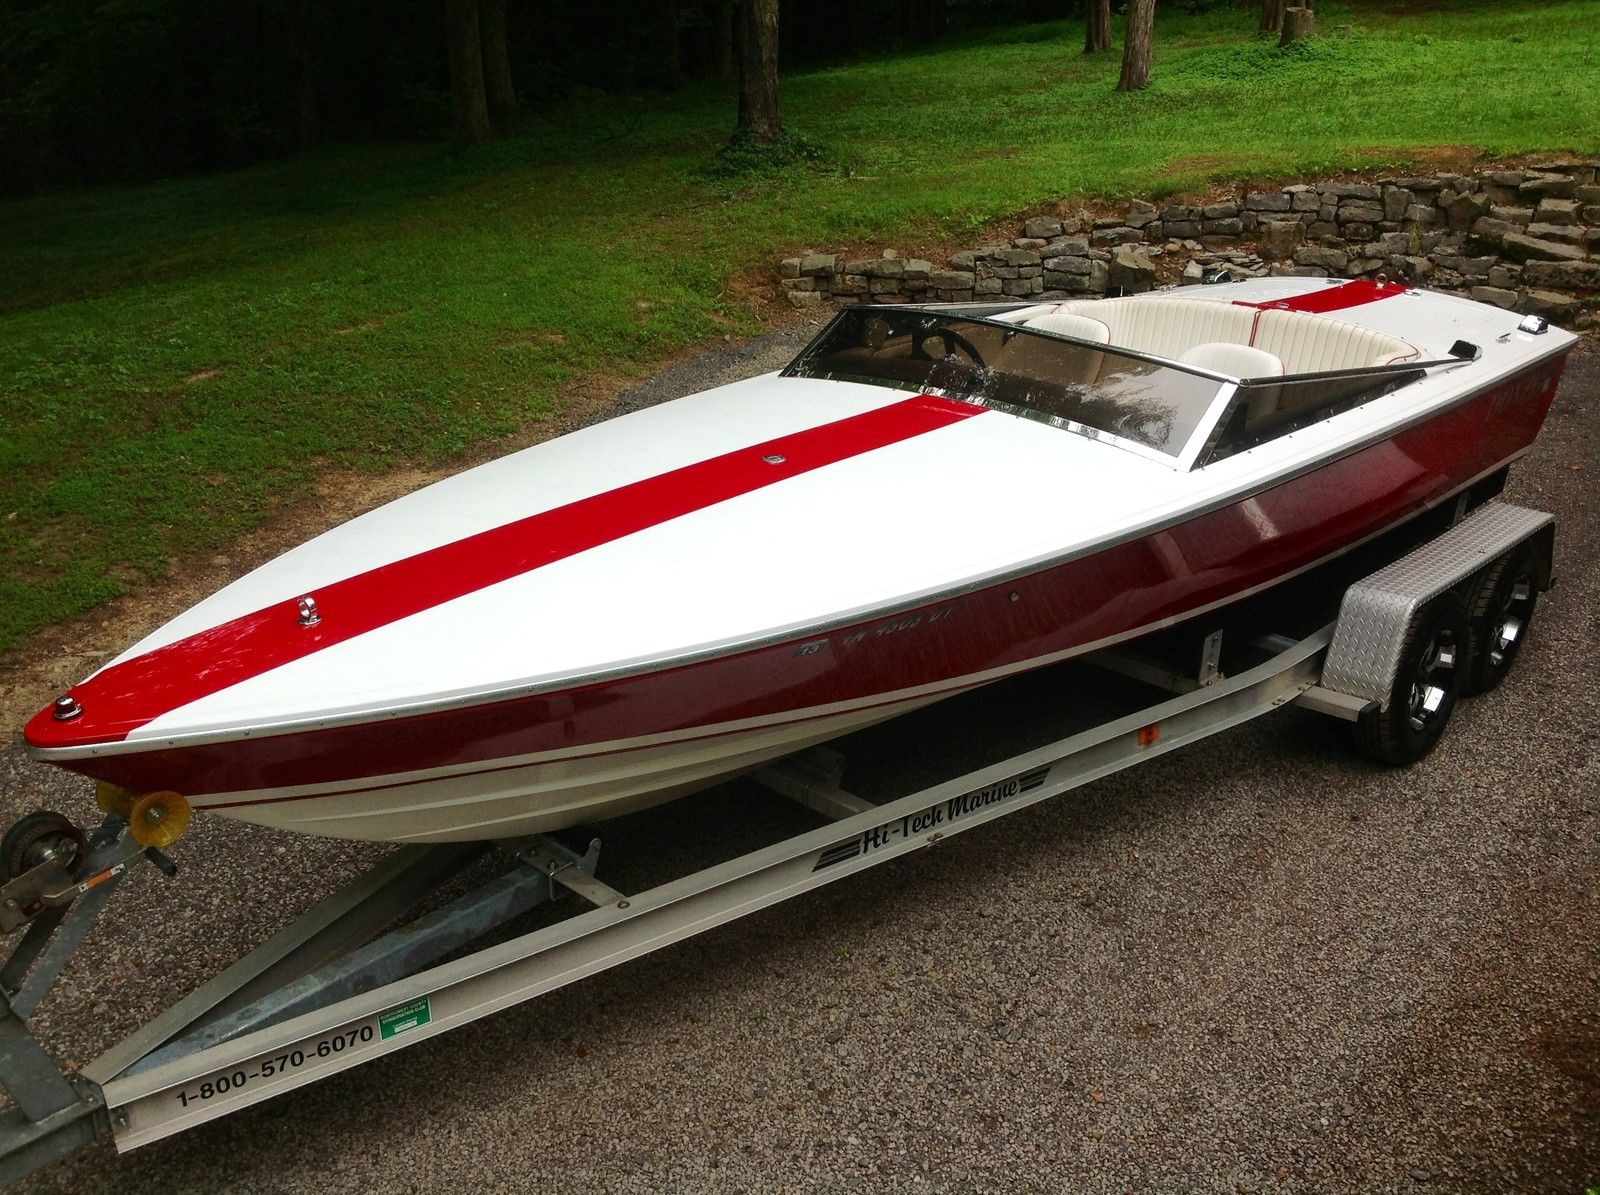 Donzi 22 Classic 1994 for sale for $11,000 - Boats-from ...